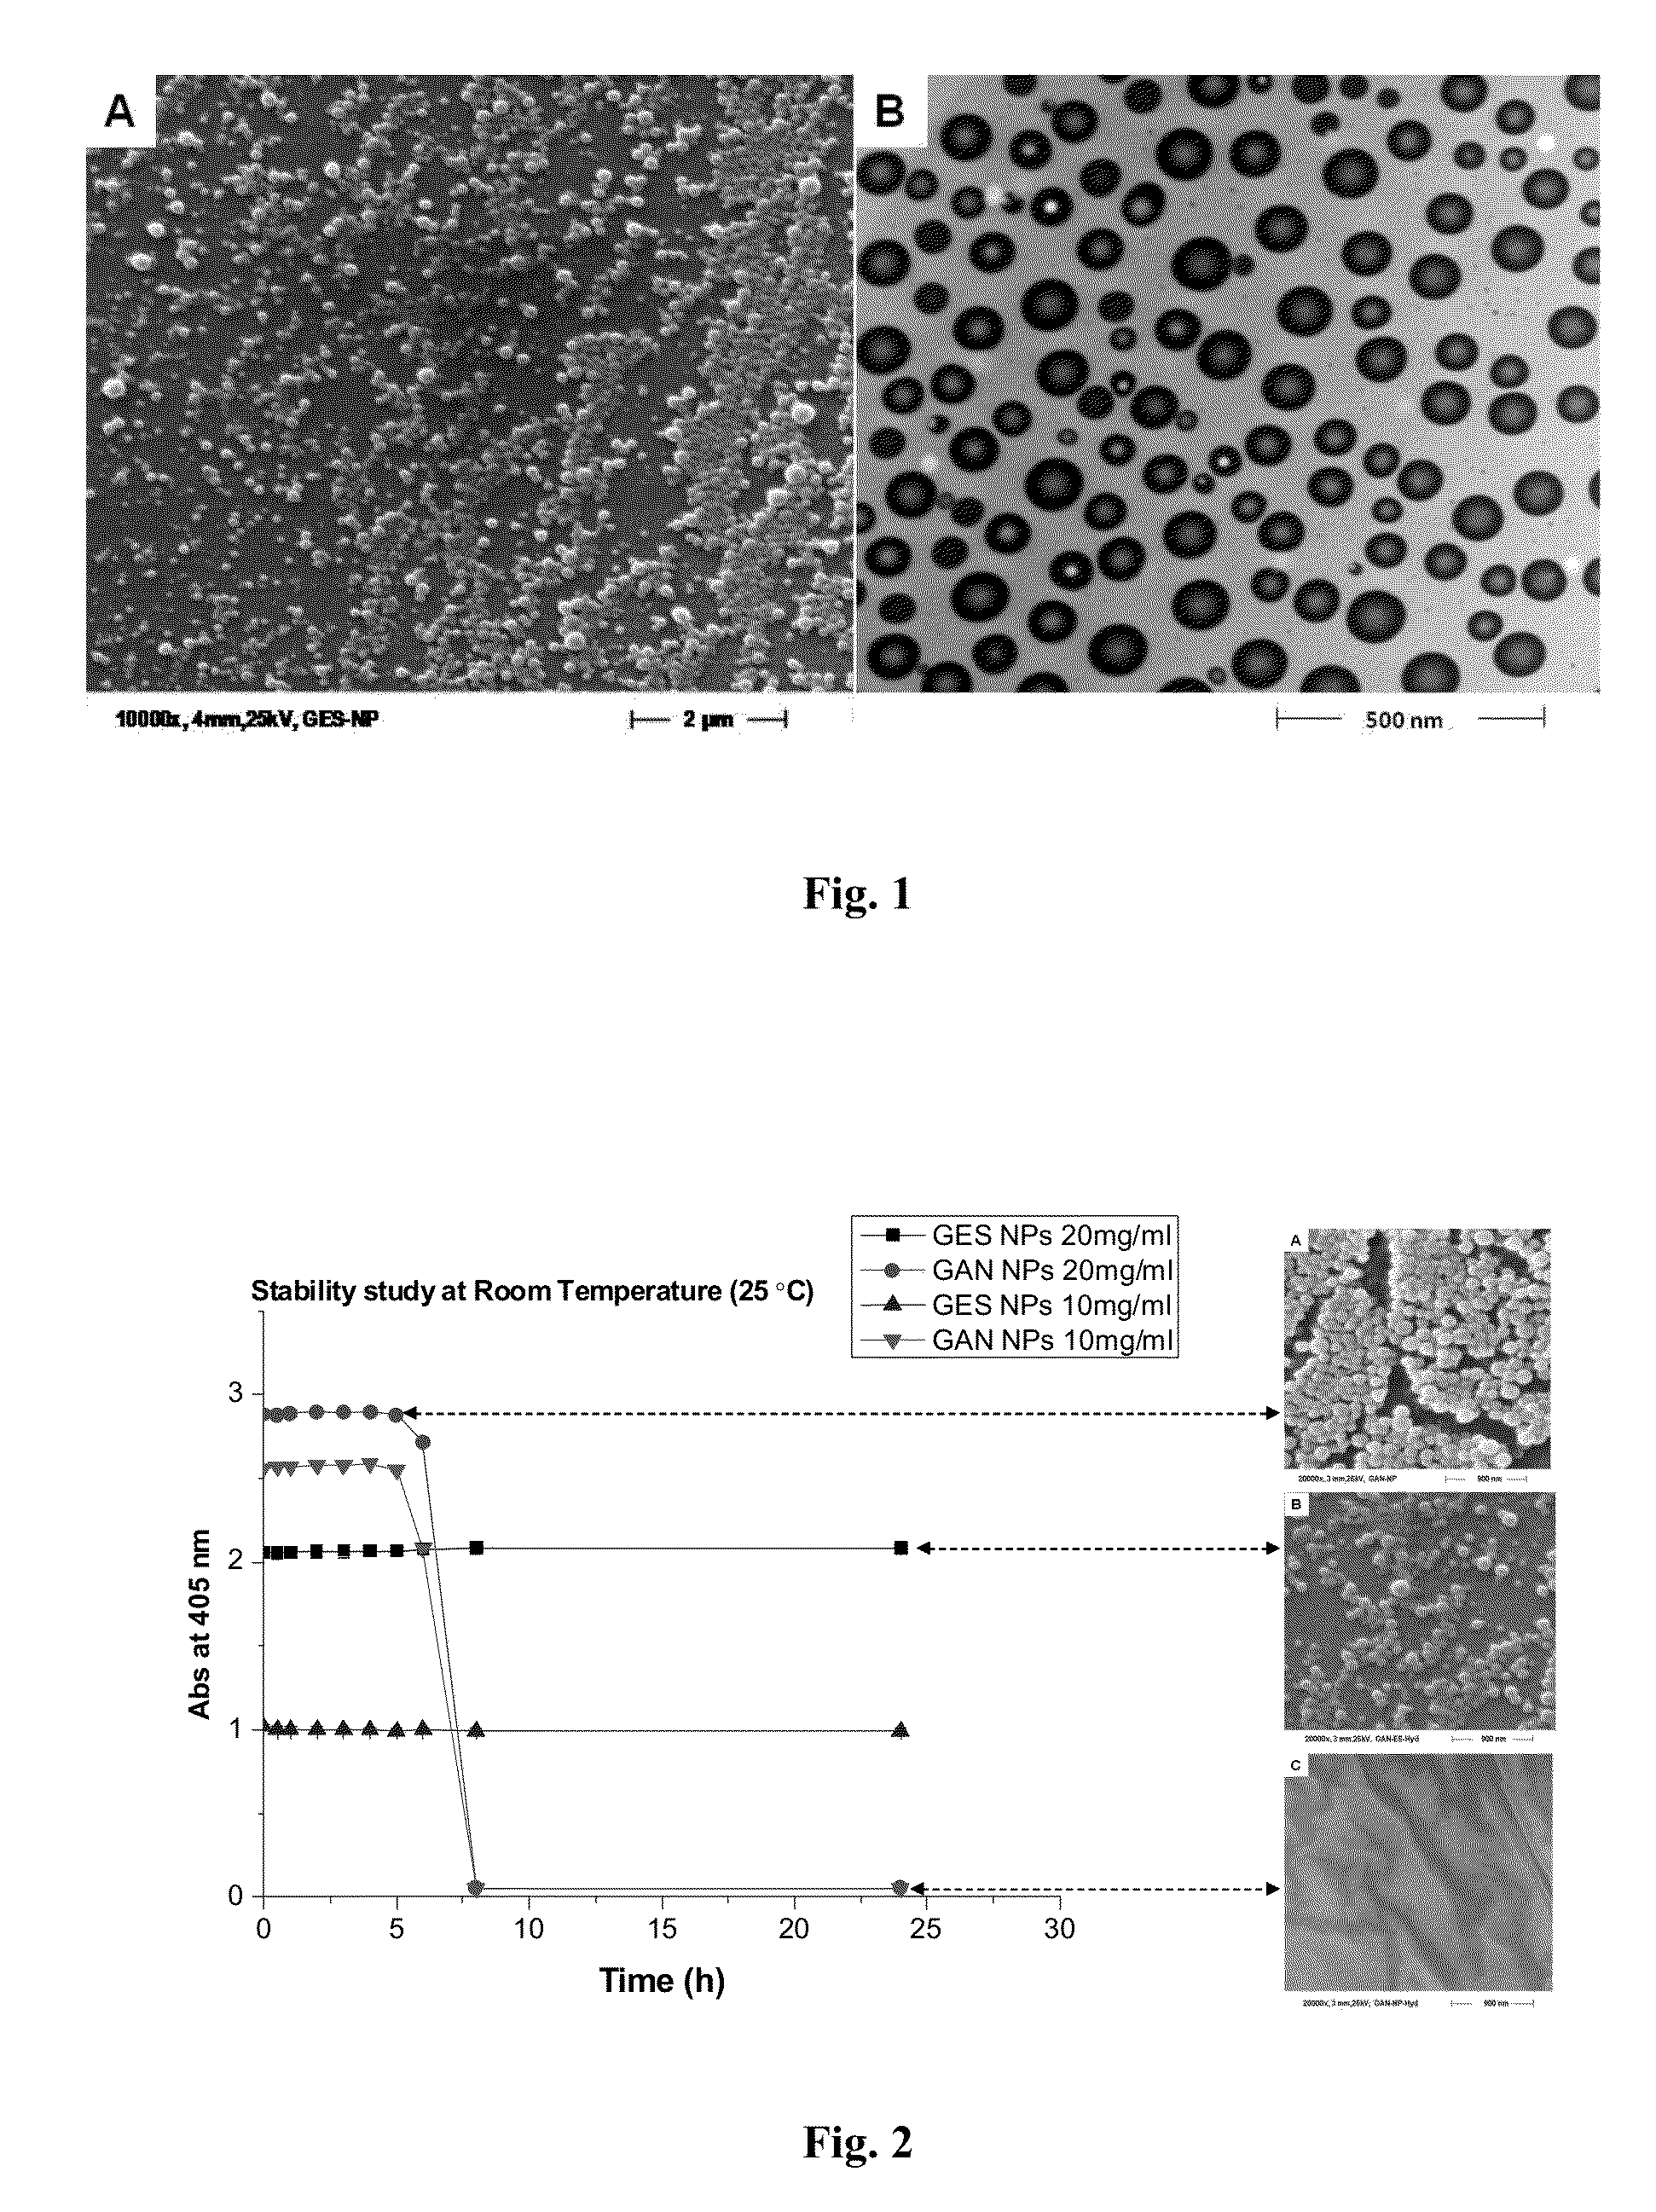 Nanoparticles comprising esters of poly (methyl vinyl ether-co-maleic anhydride) and uses thereof